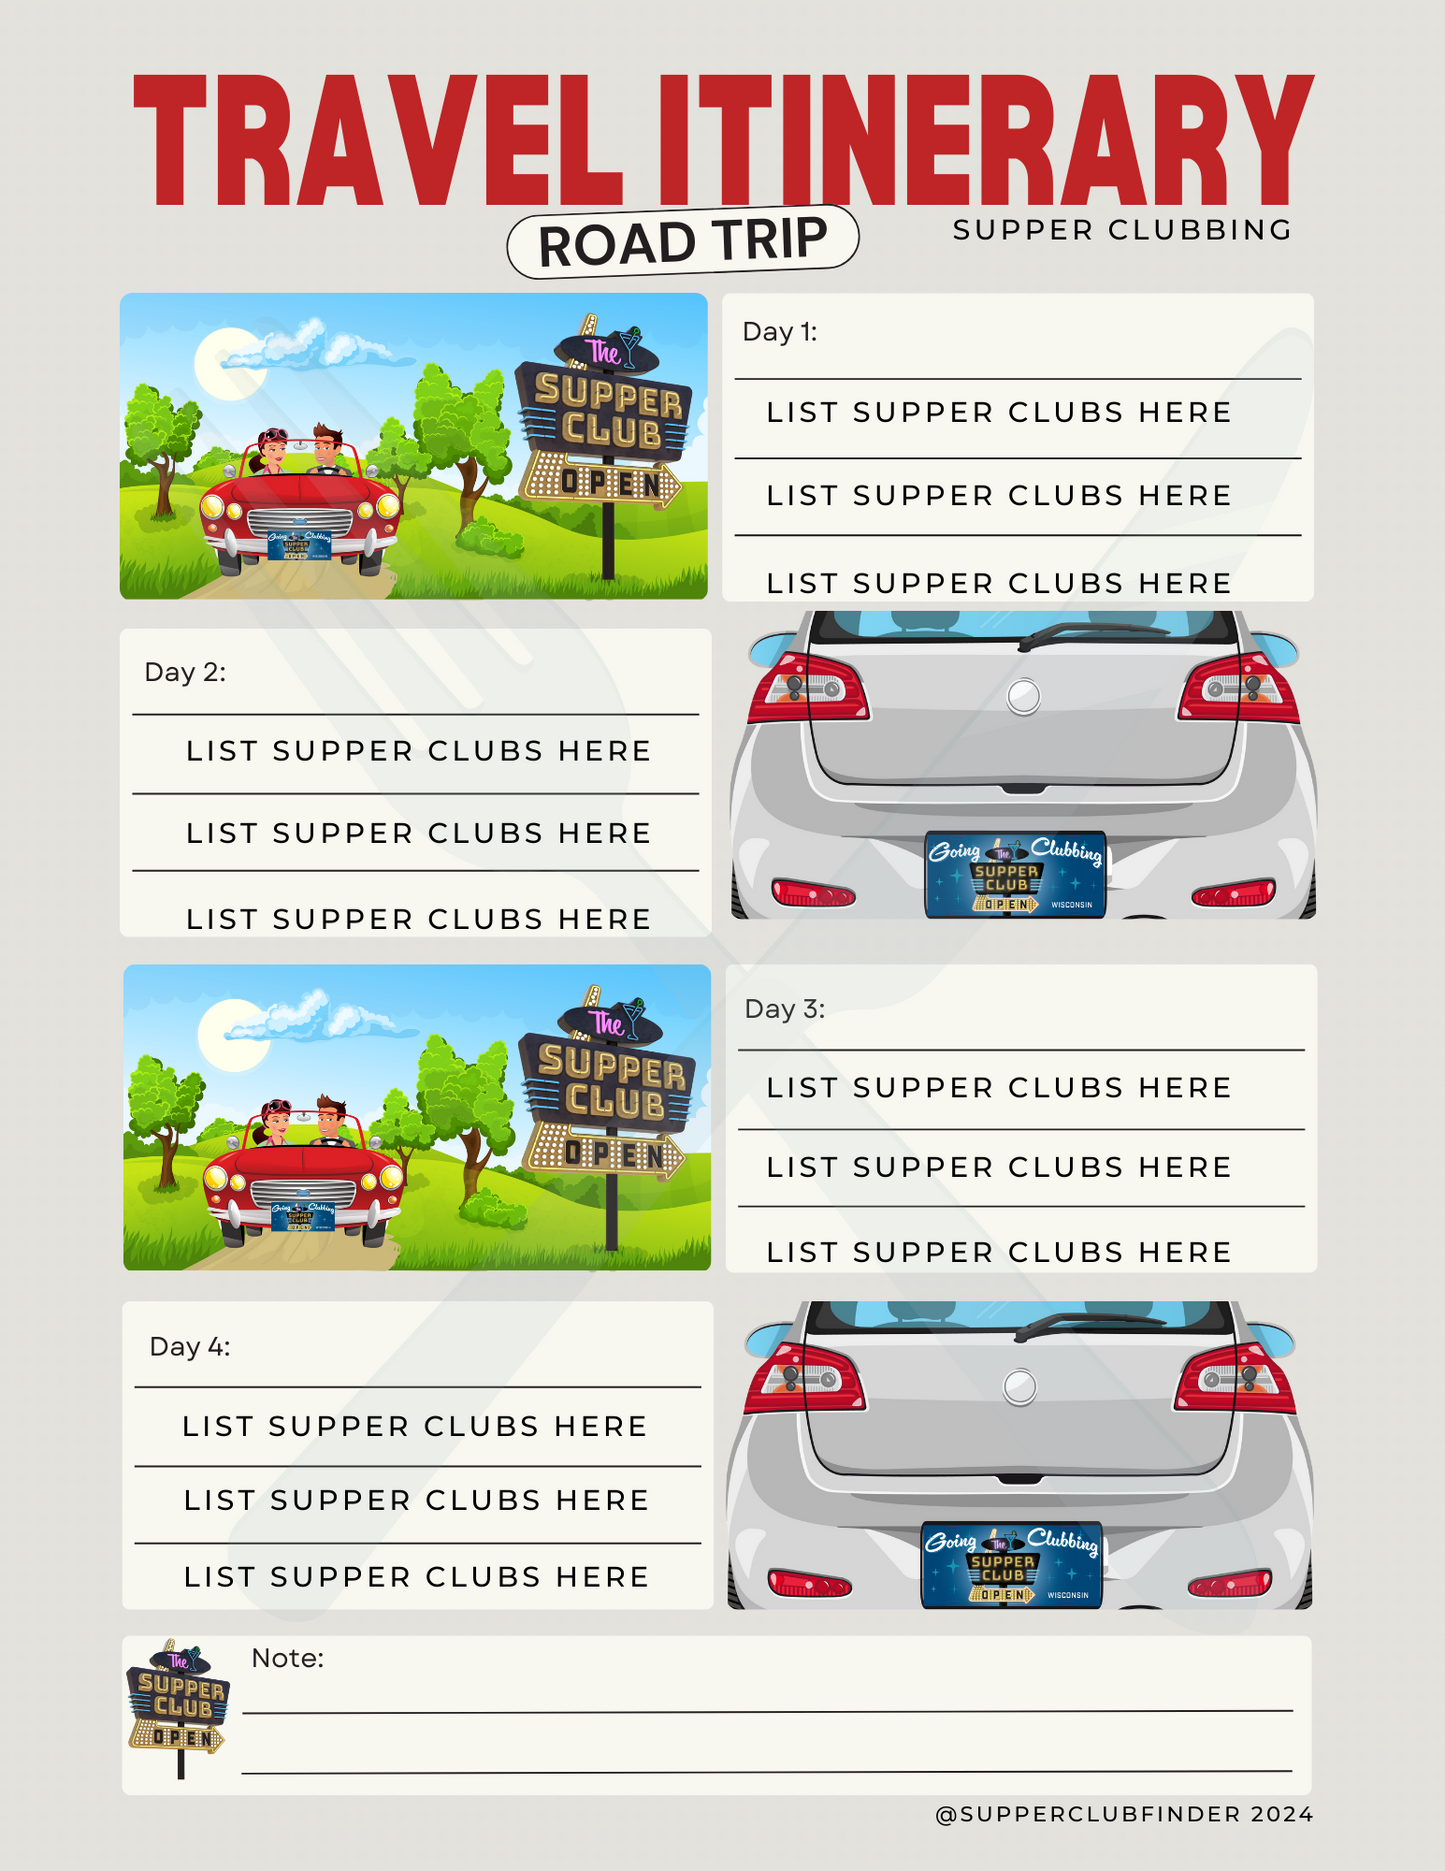 Travel Itinerary for your ROAD TRIP